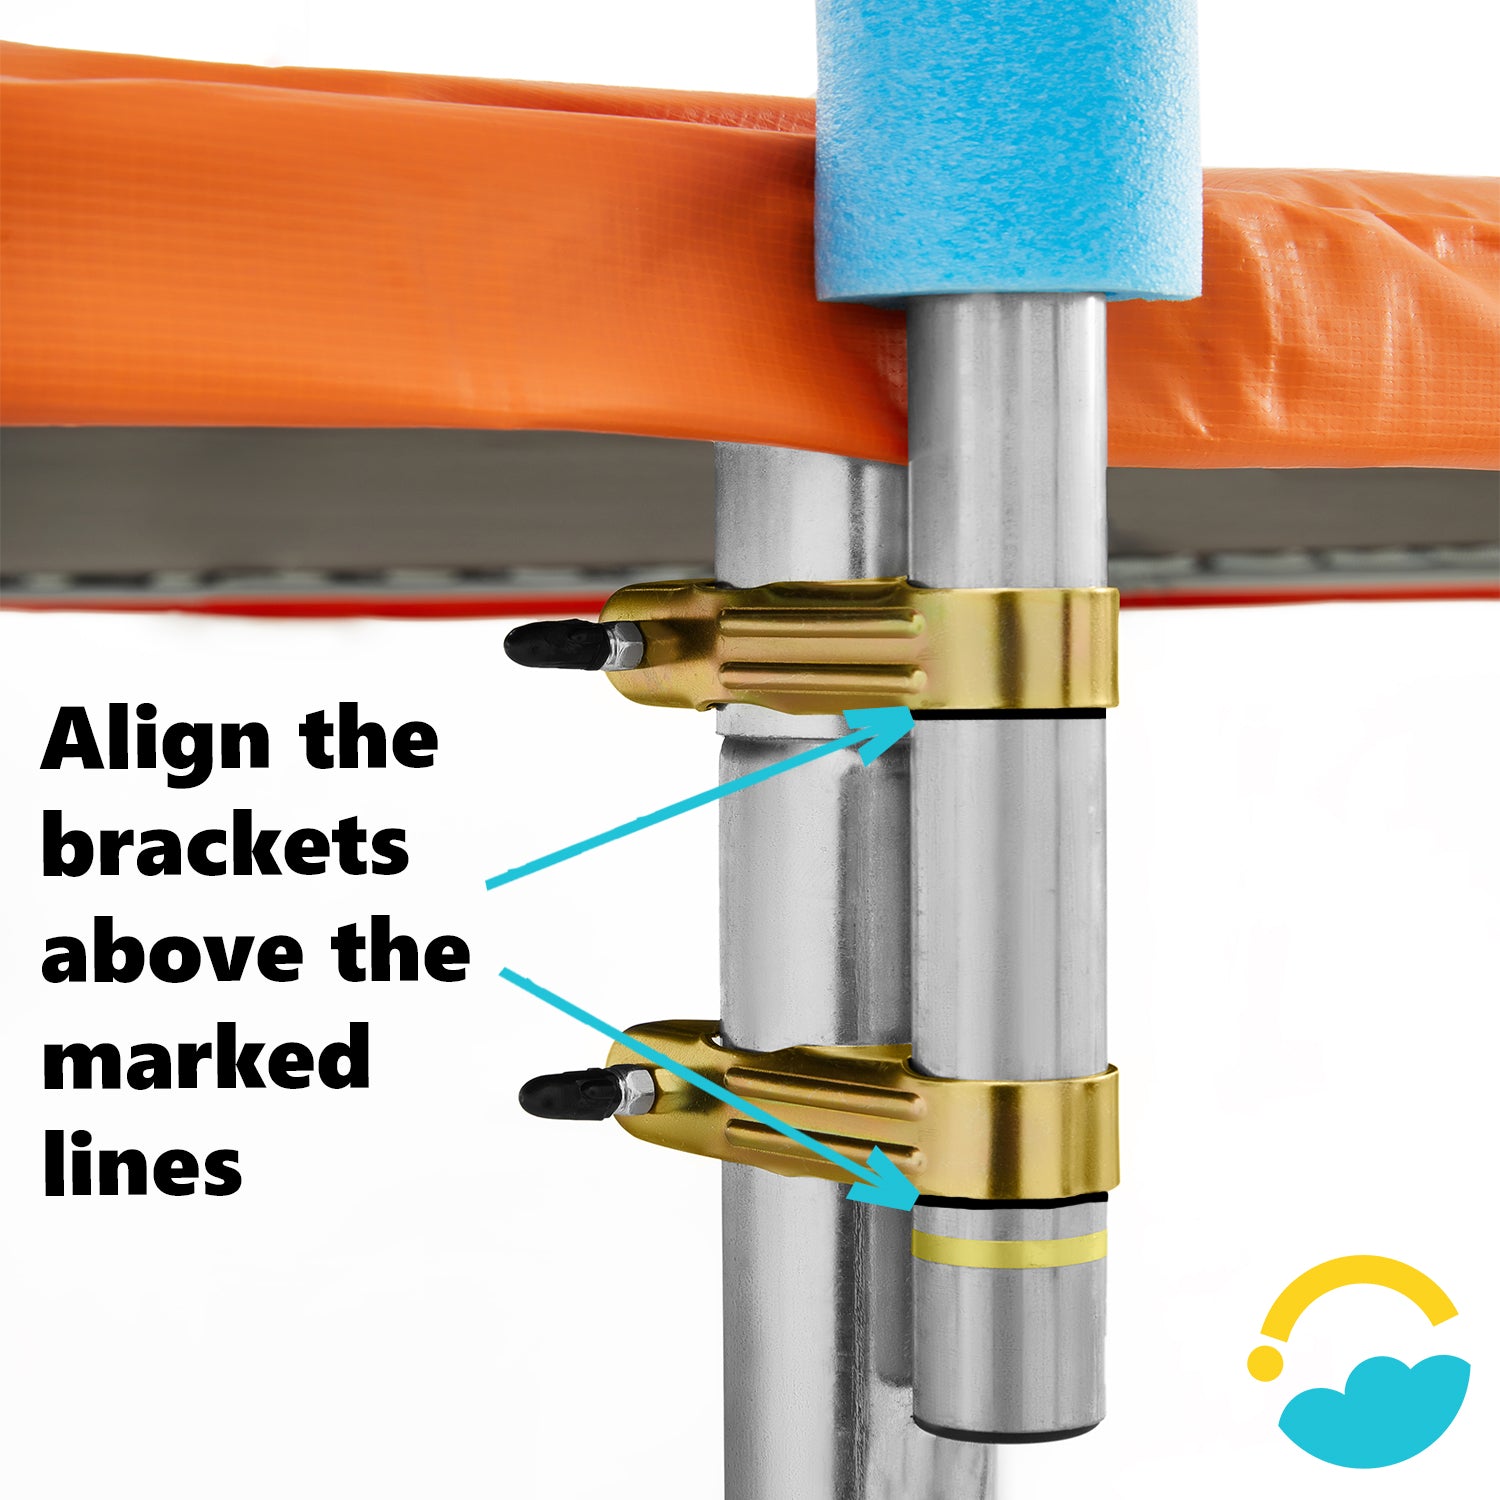 Image of how to connect the Enclosure Poles to the Trampoline.  Align the brackets above the marked lines.  